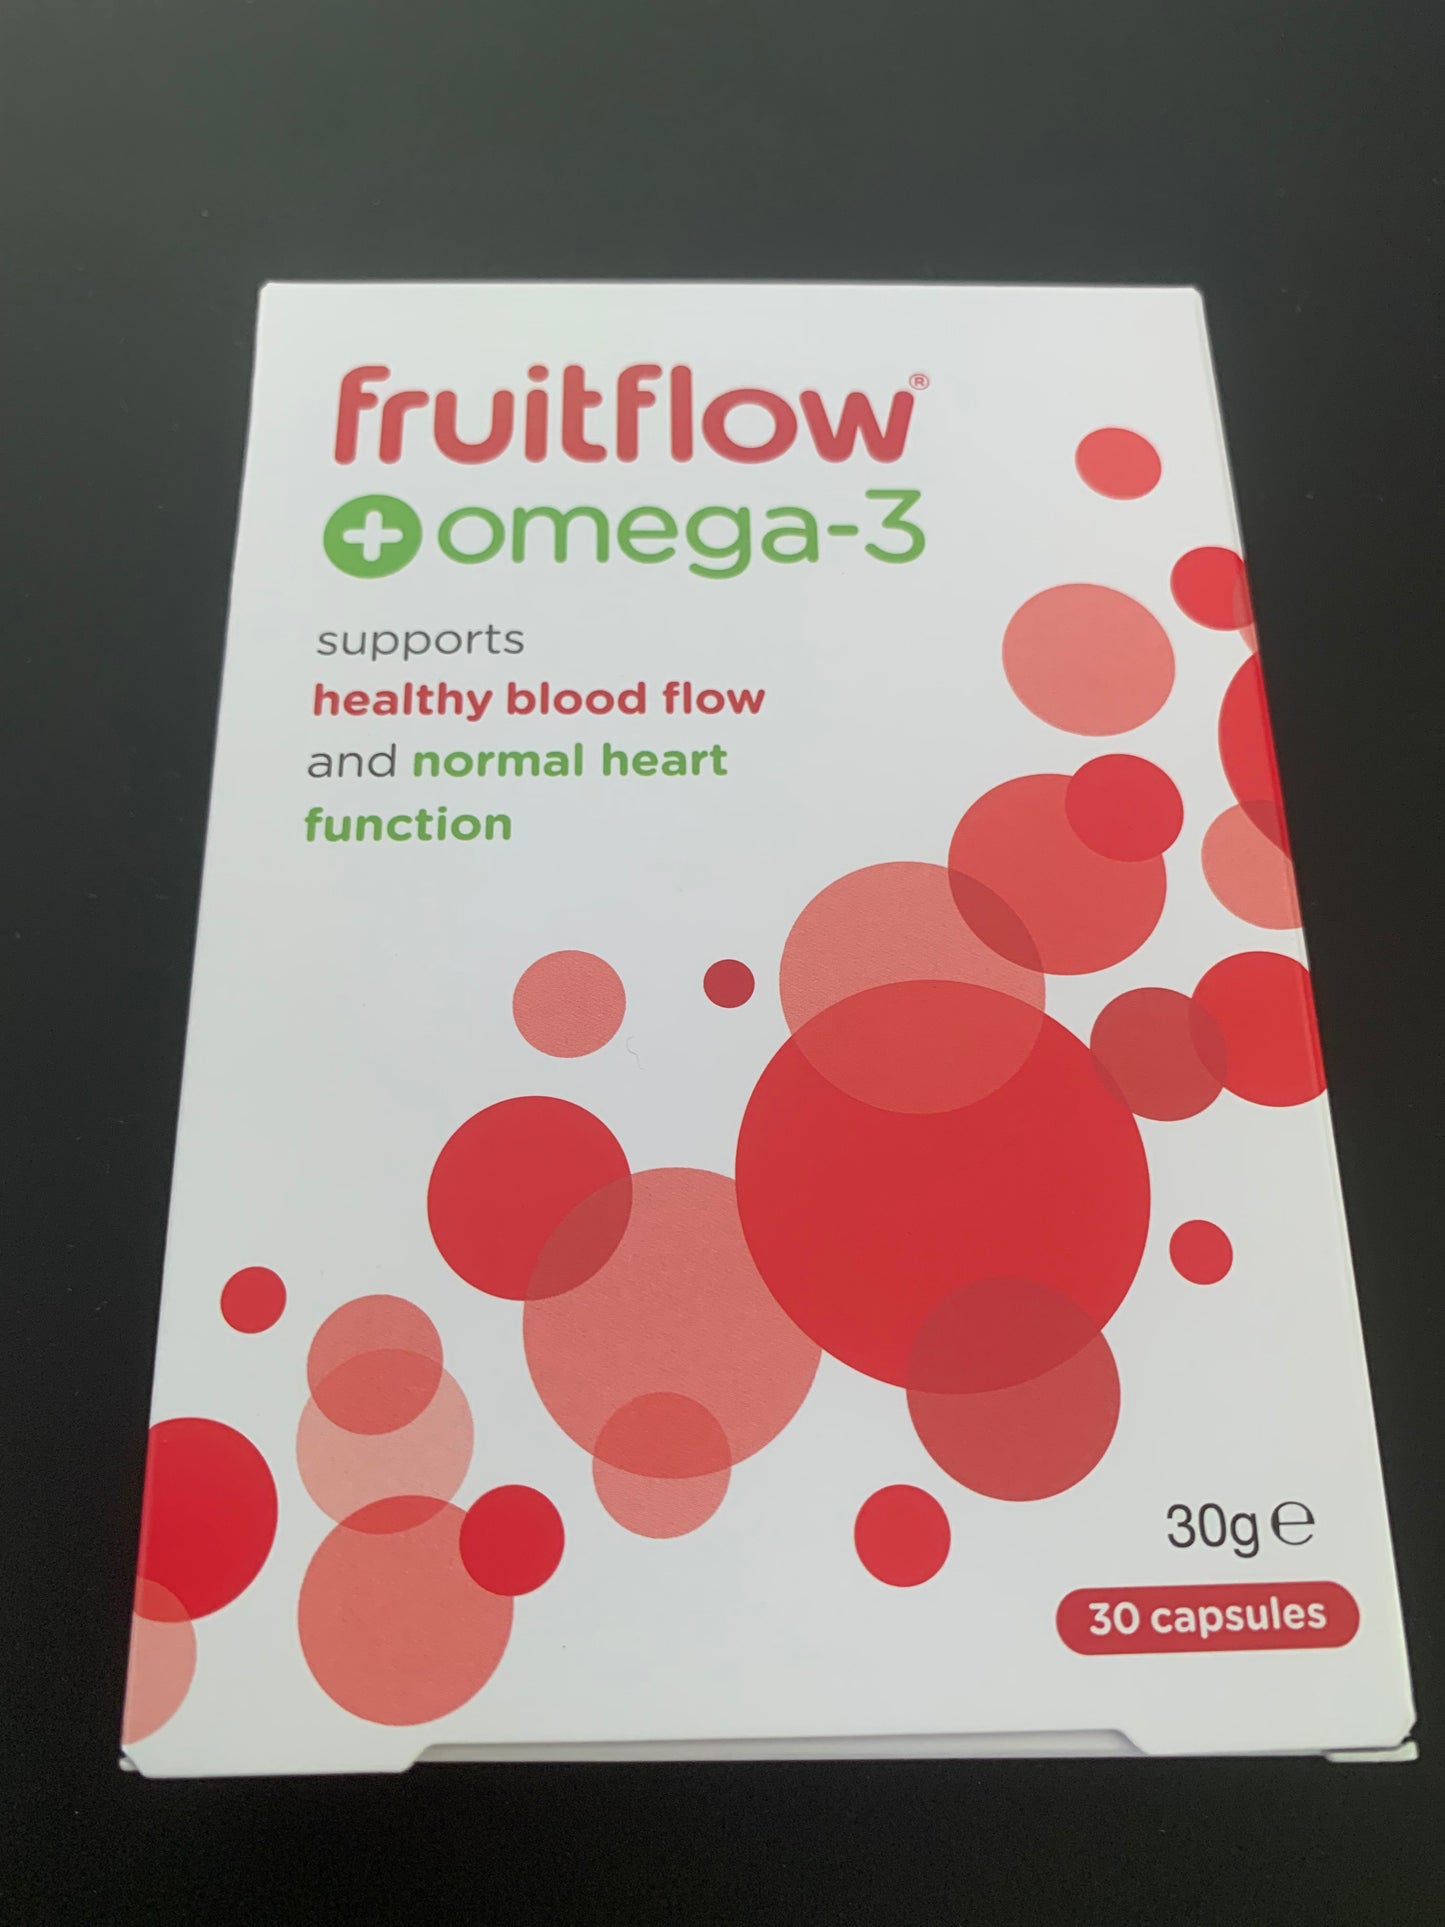 Water soluble Tomato Concentrate (FruitFlow) and Omega-3 fish oil concentrate Food Supplement